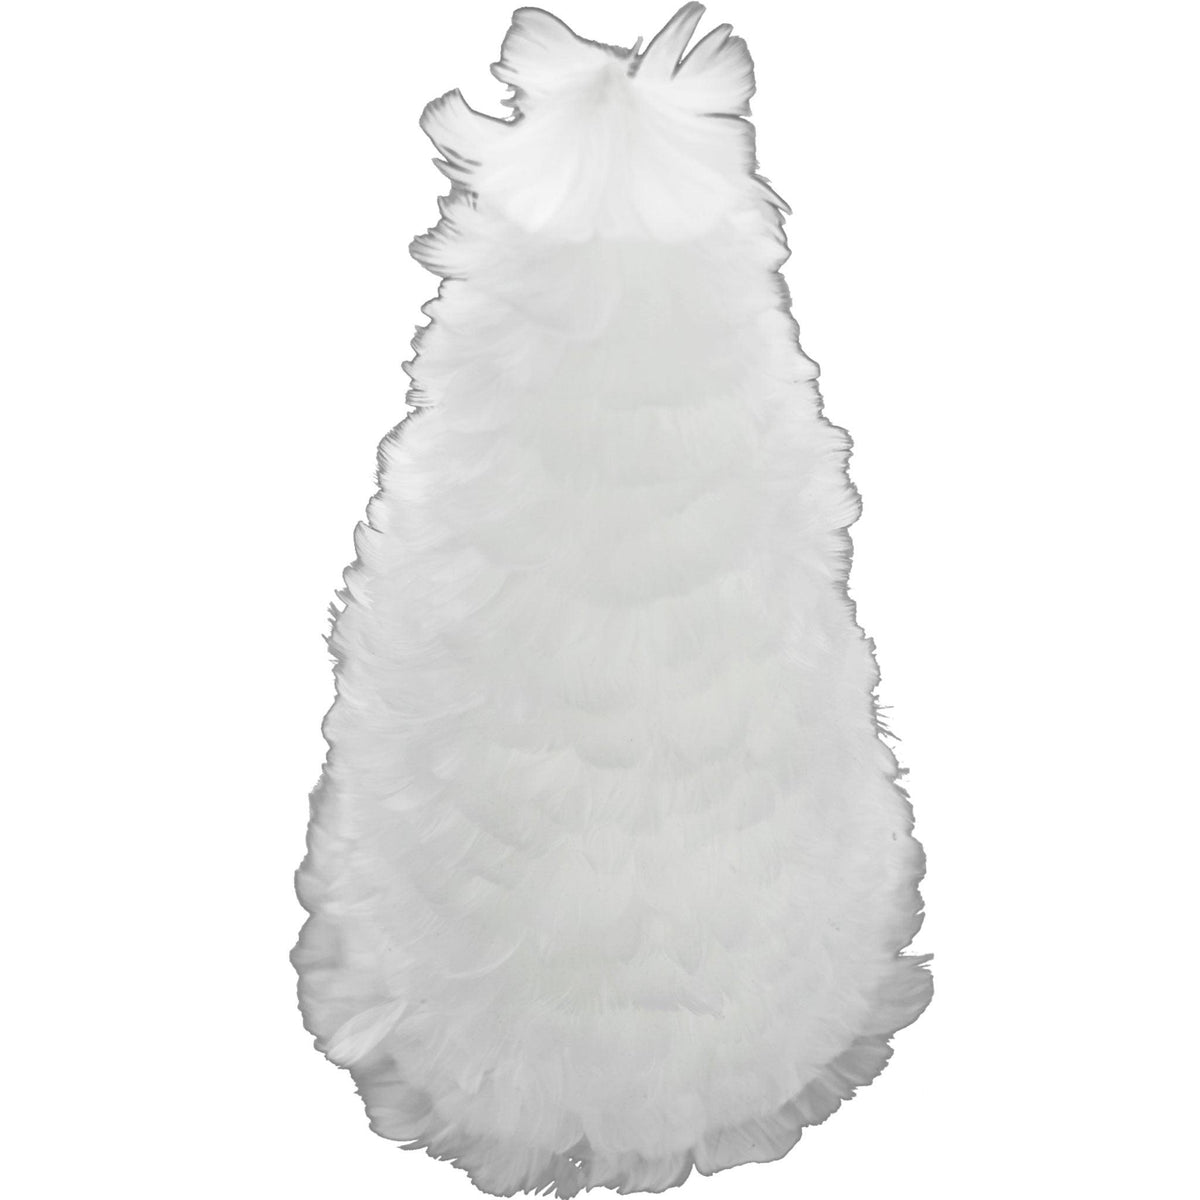 18in tall white goose feather cone trees are on sale at leedisplay.com